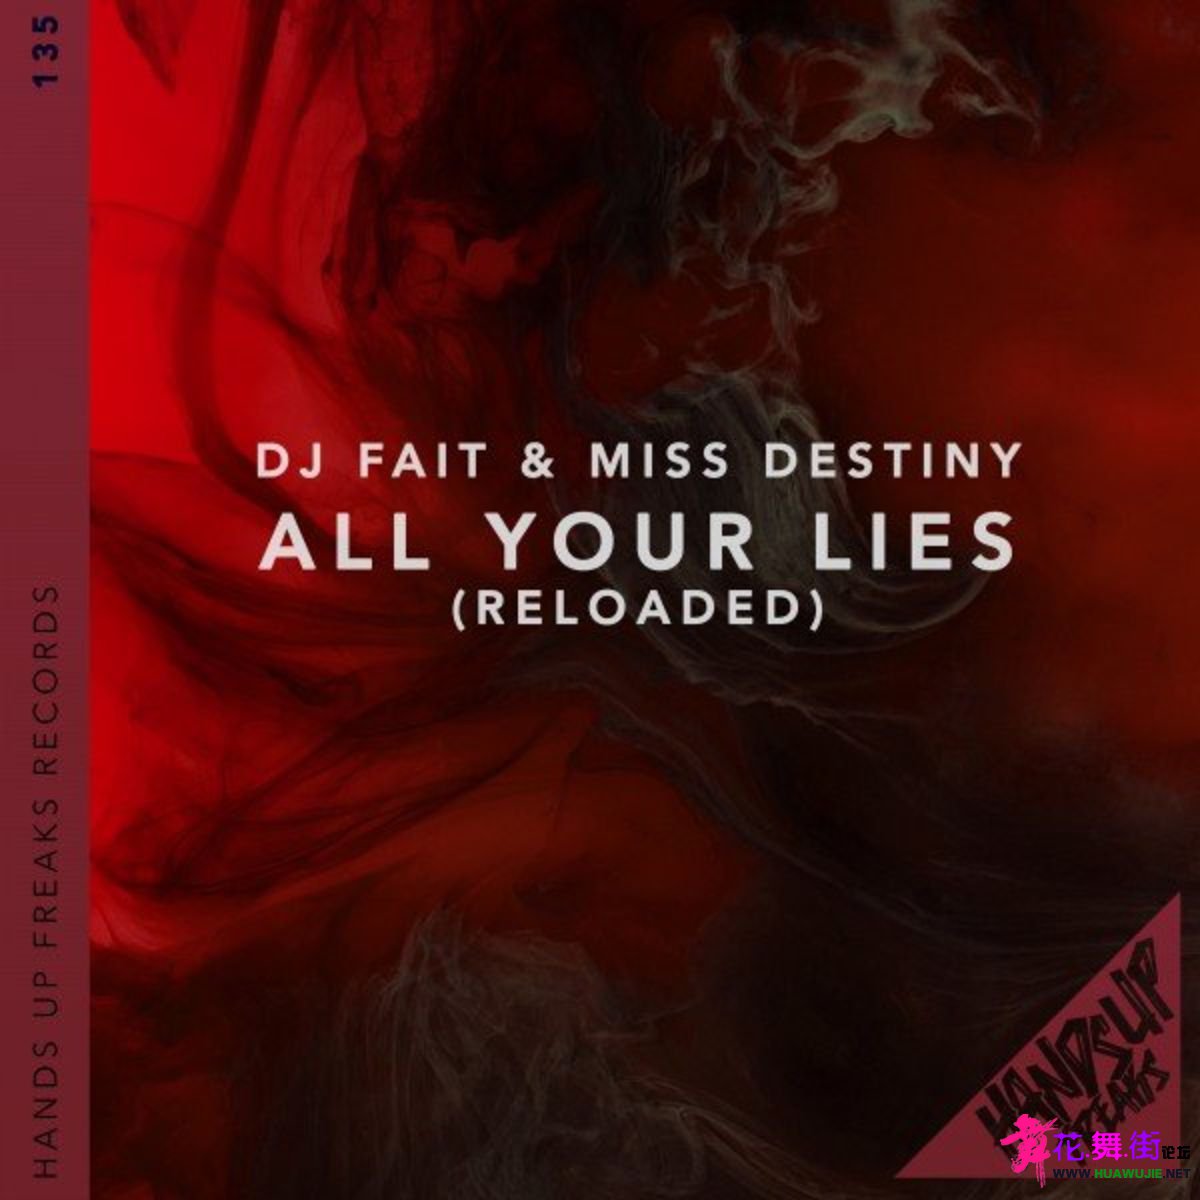 00-dj_fait_and_miss_destiny-all_your_lies_(reloaded)-cover-2021.jpg